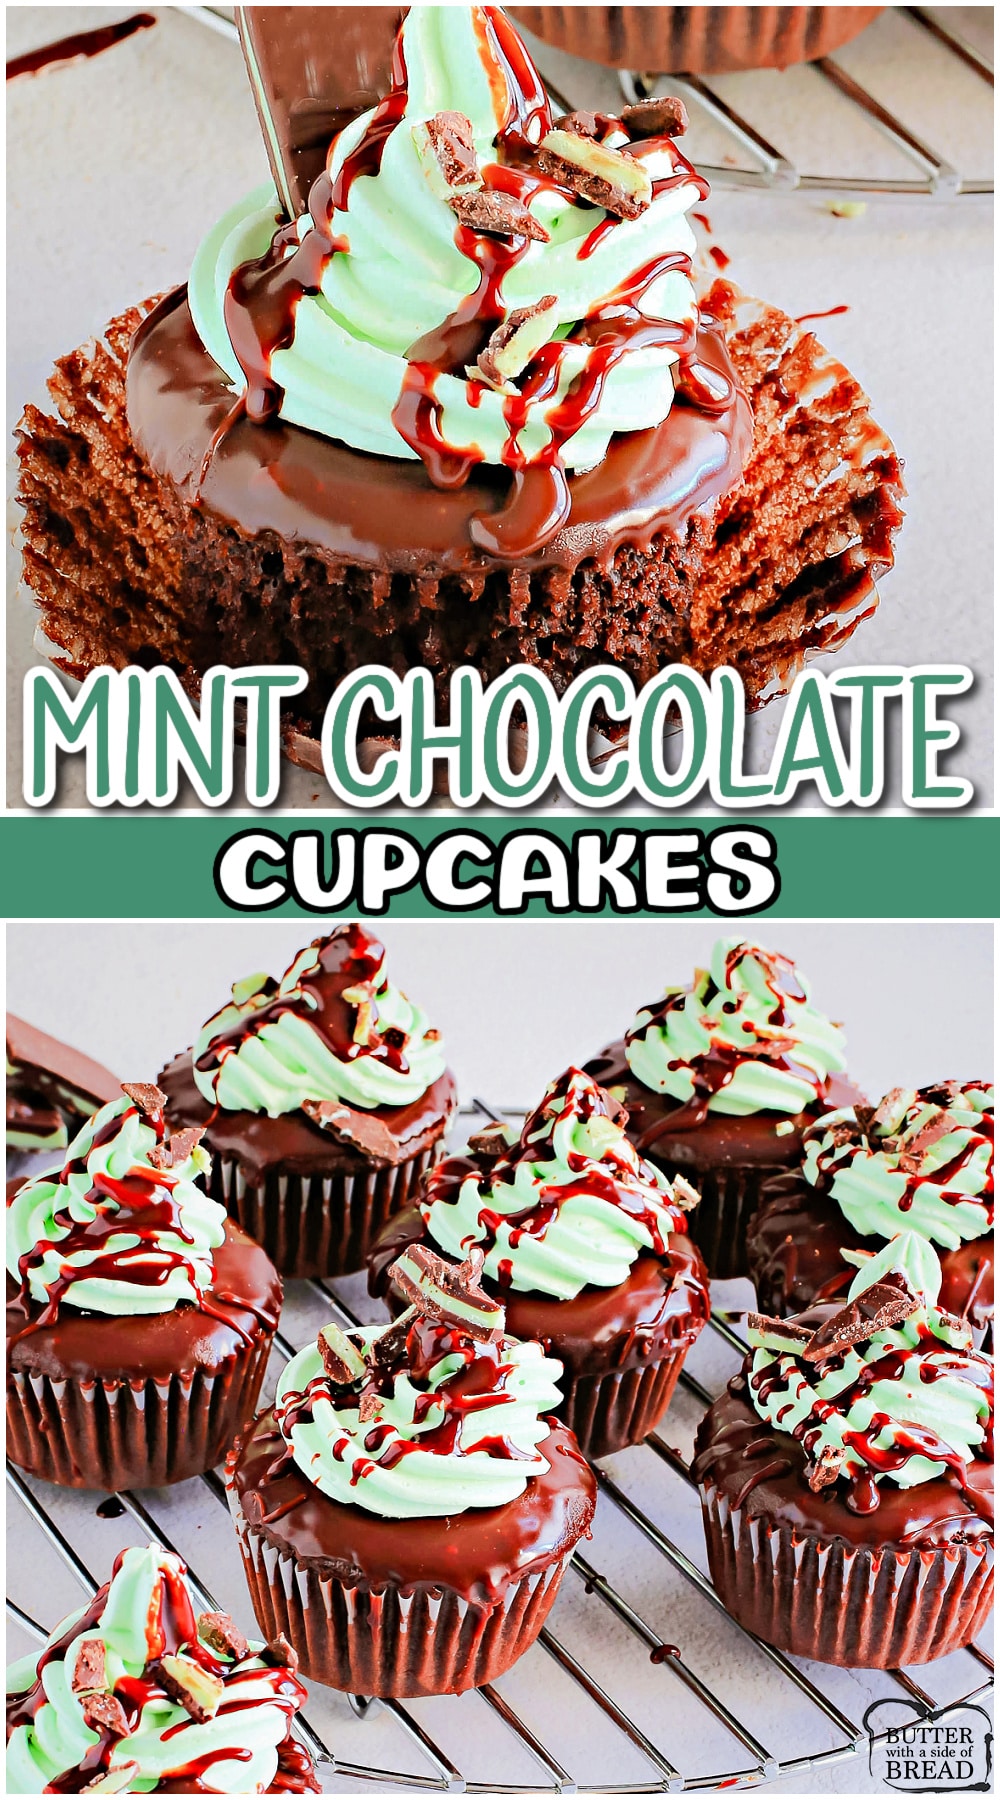 Mint Chocolate Cupcakes are made easily with our boxed cake mix hacks! These cupcakes with boxed cake mix are dipped in a chocolate glaze and topped with smooth mint buttercream.